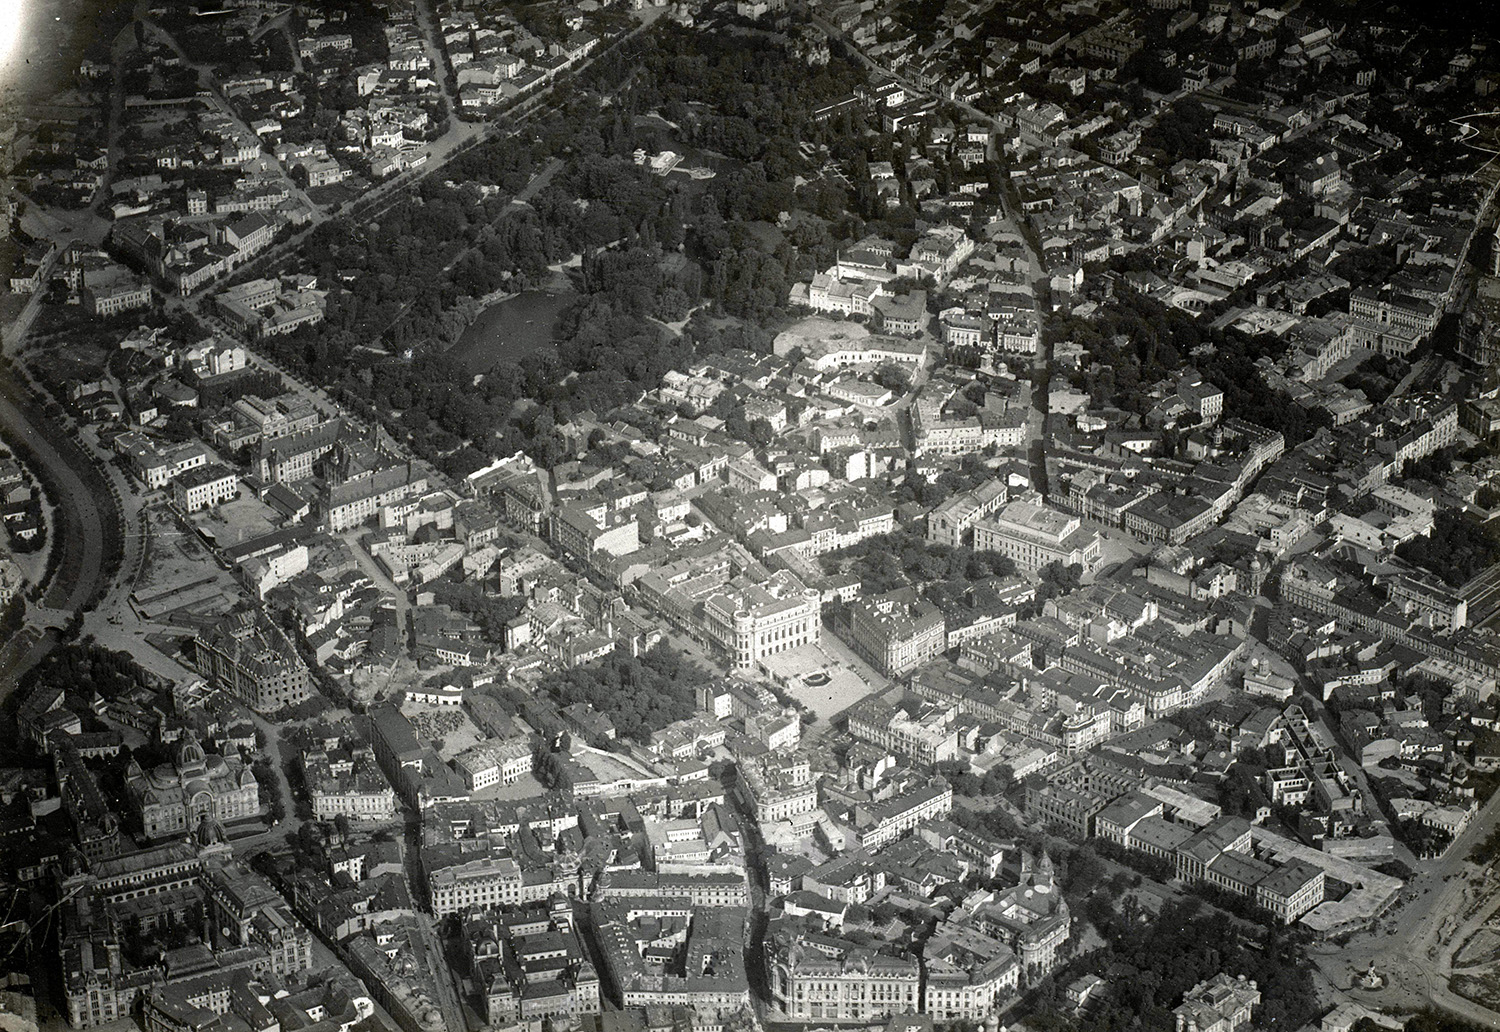 Panorama of Bucharest, probably from a German zeppelin, 1916.